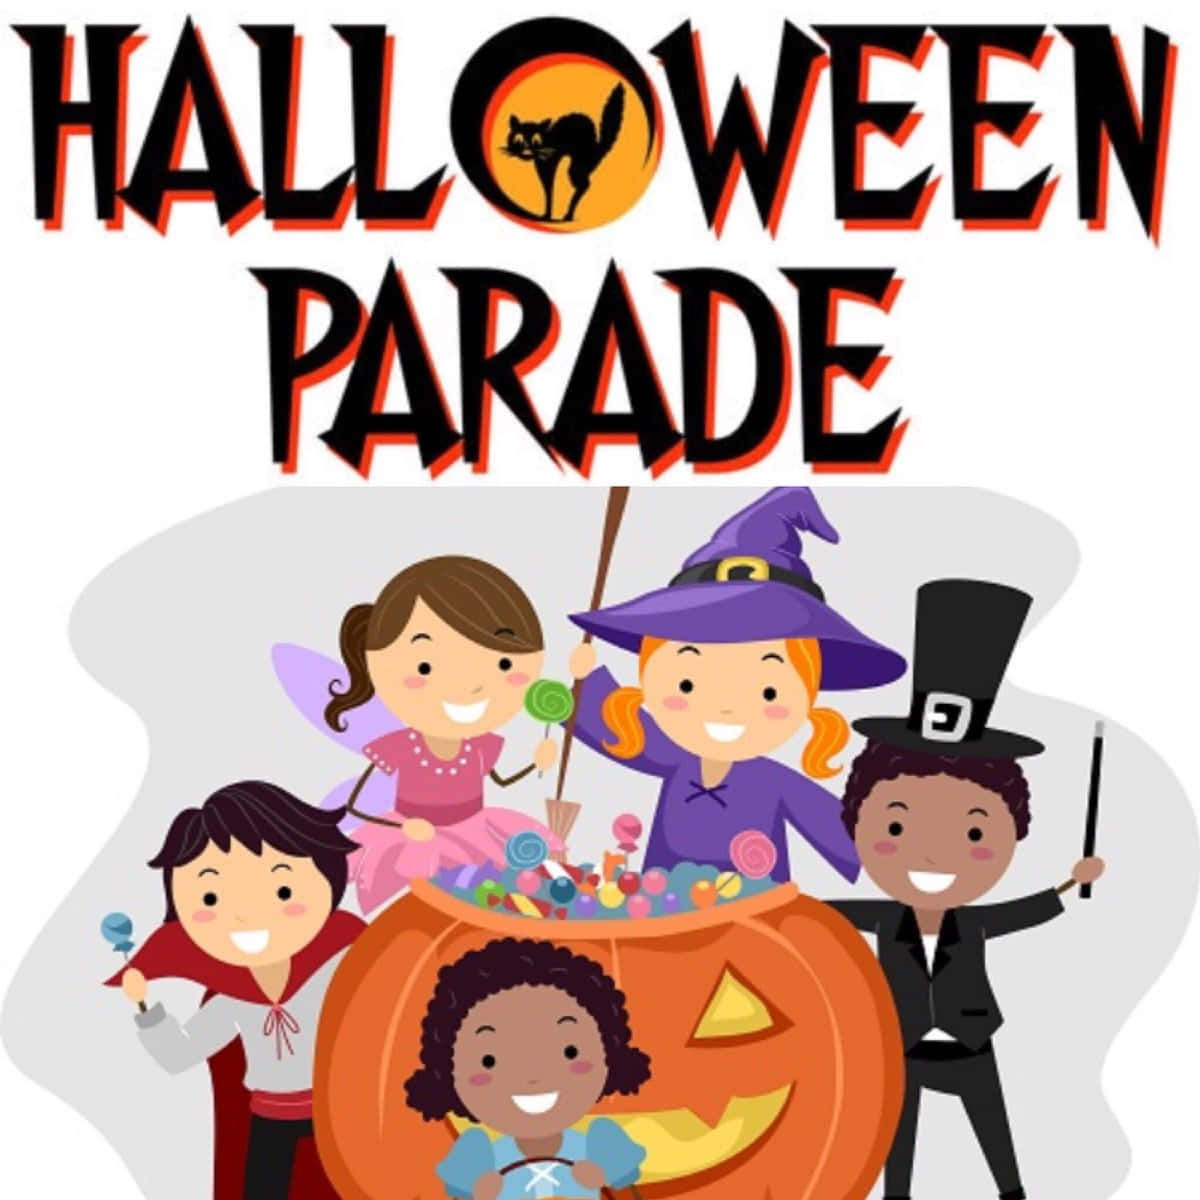 Join the revelers at the colorful and spooky Halloween Parade! Wallpaper